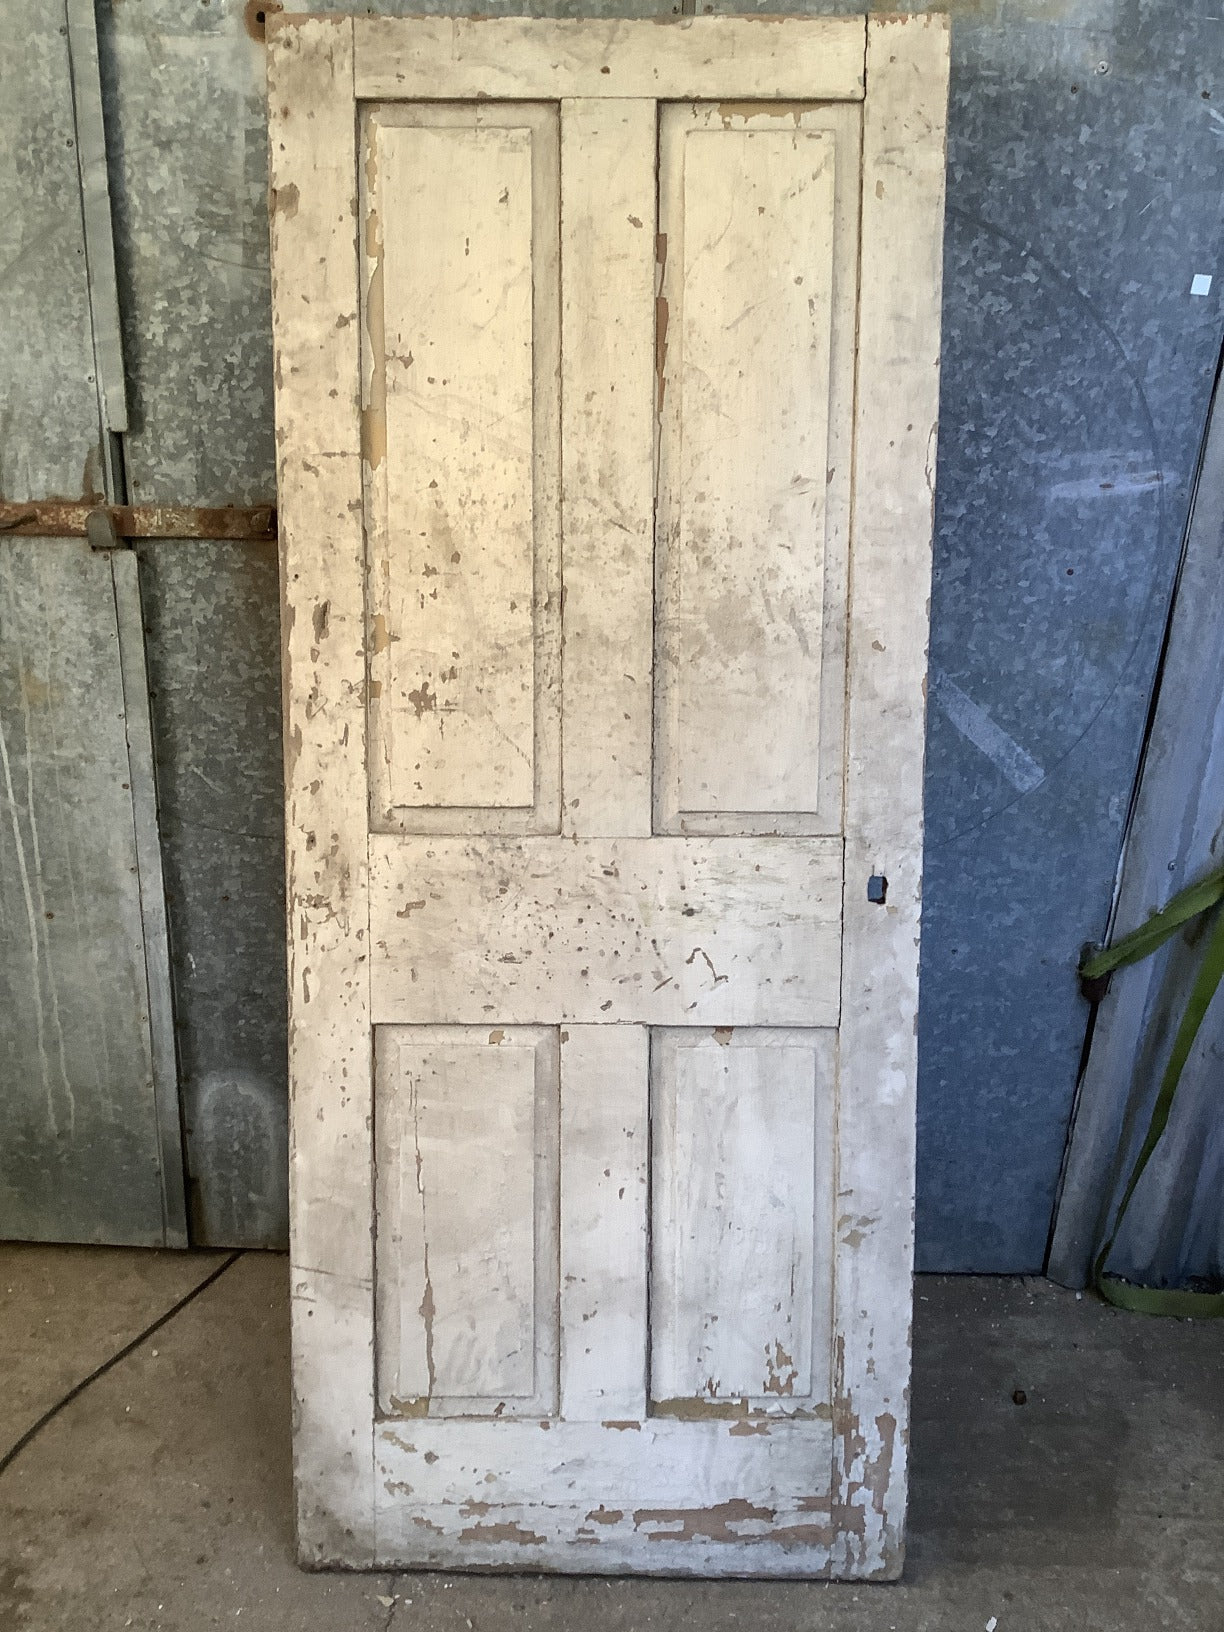 31 7/8"X76 7/8" Old Internal Painted Pine Four Panel Door 2 over 2 Reclamation